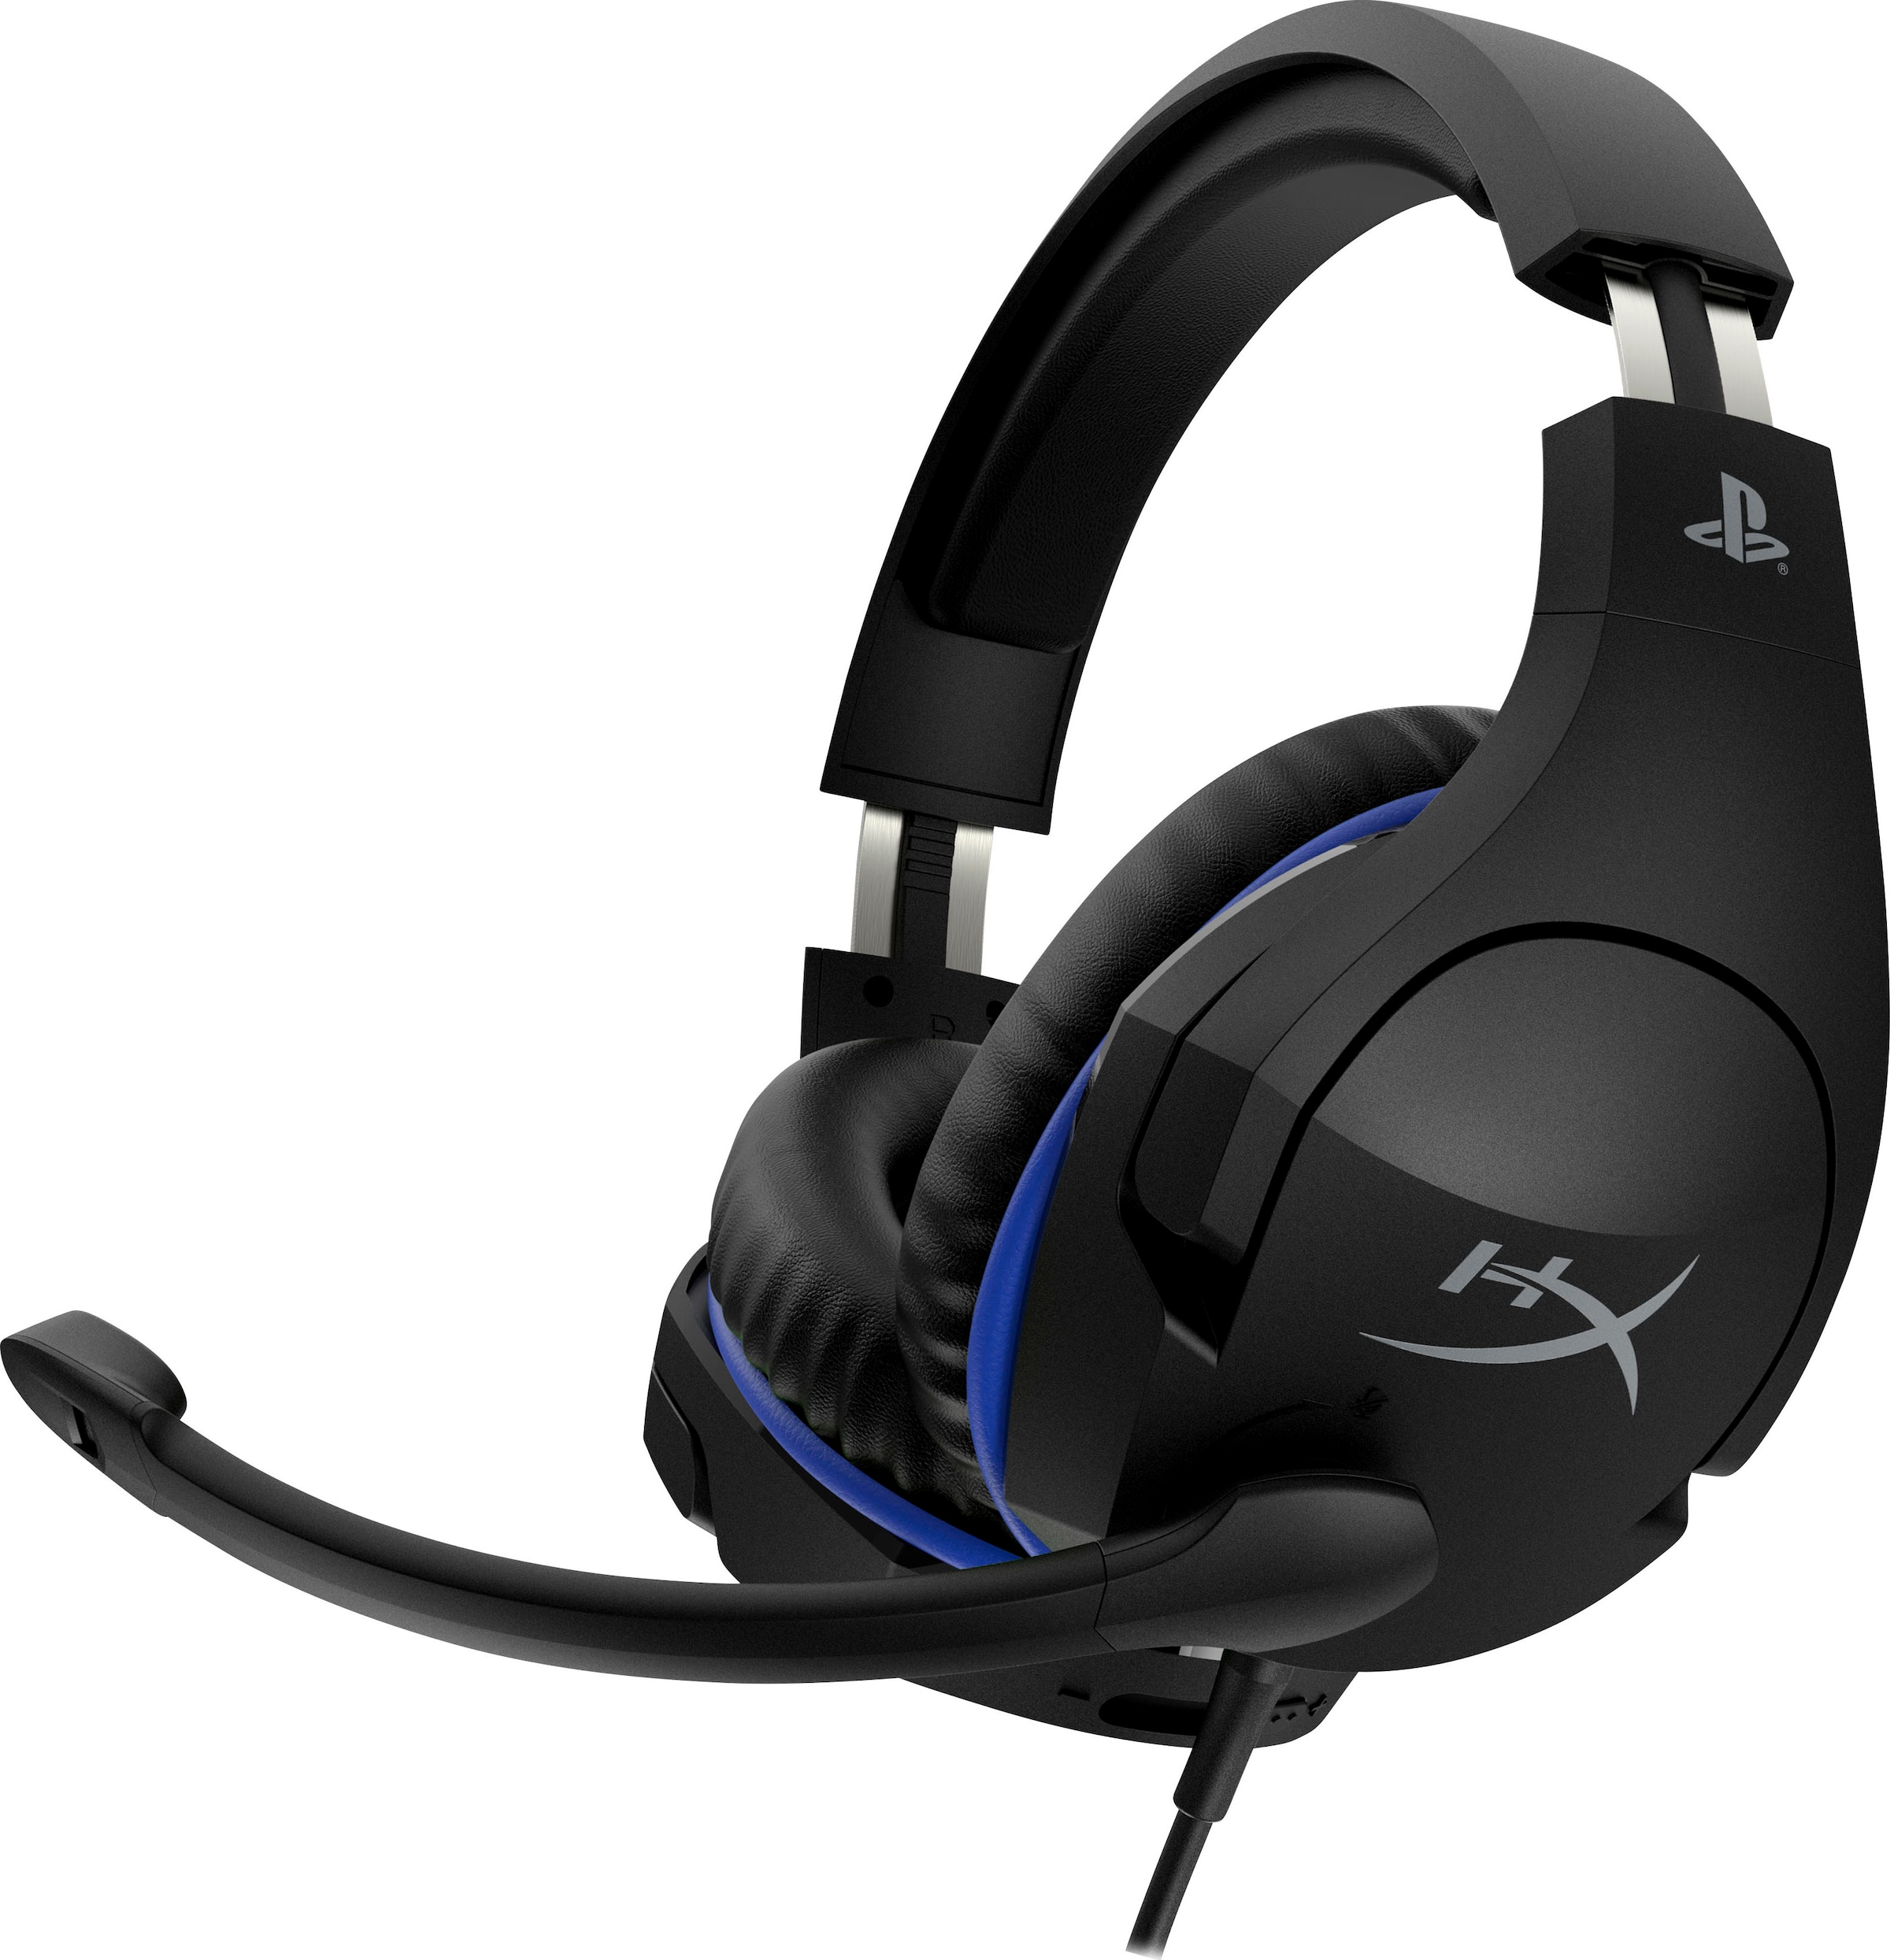 HyperX Gaming-Headset »Cloud Stinger (PS4 abnehmbar OTTO Licensed)«, bei Mikrofon jetzt